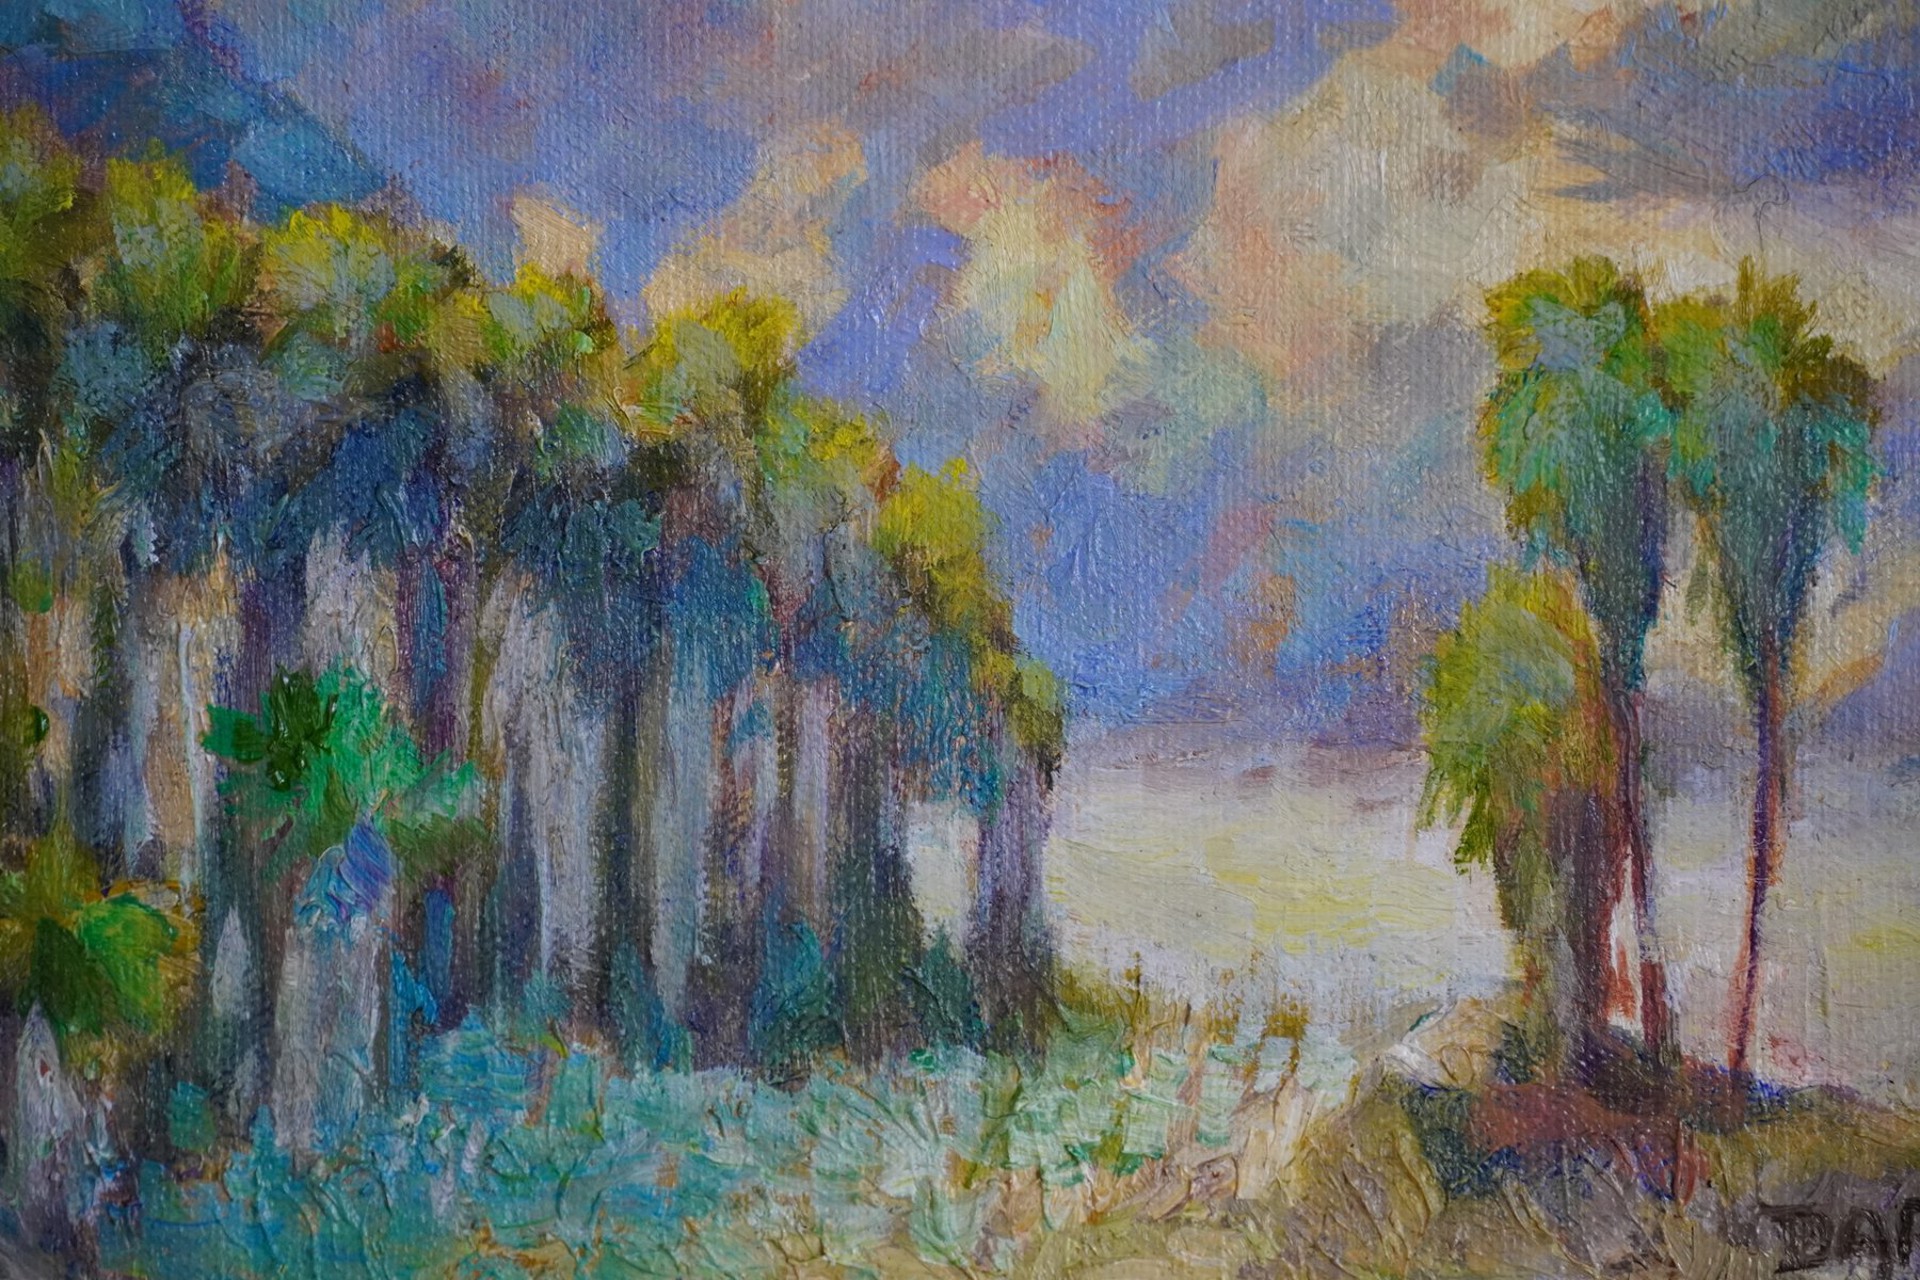 Stand of Palms by Darrel McPherson